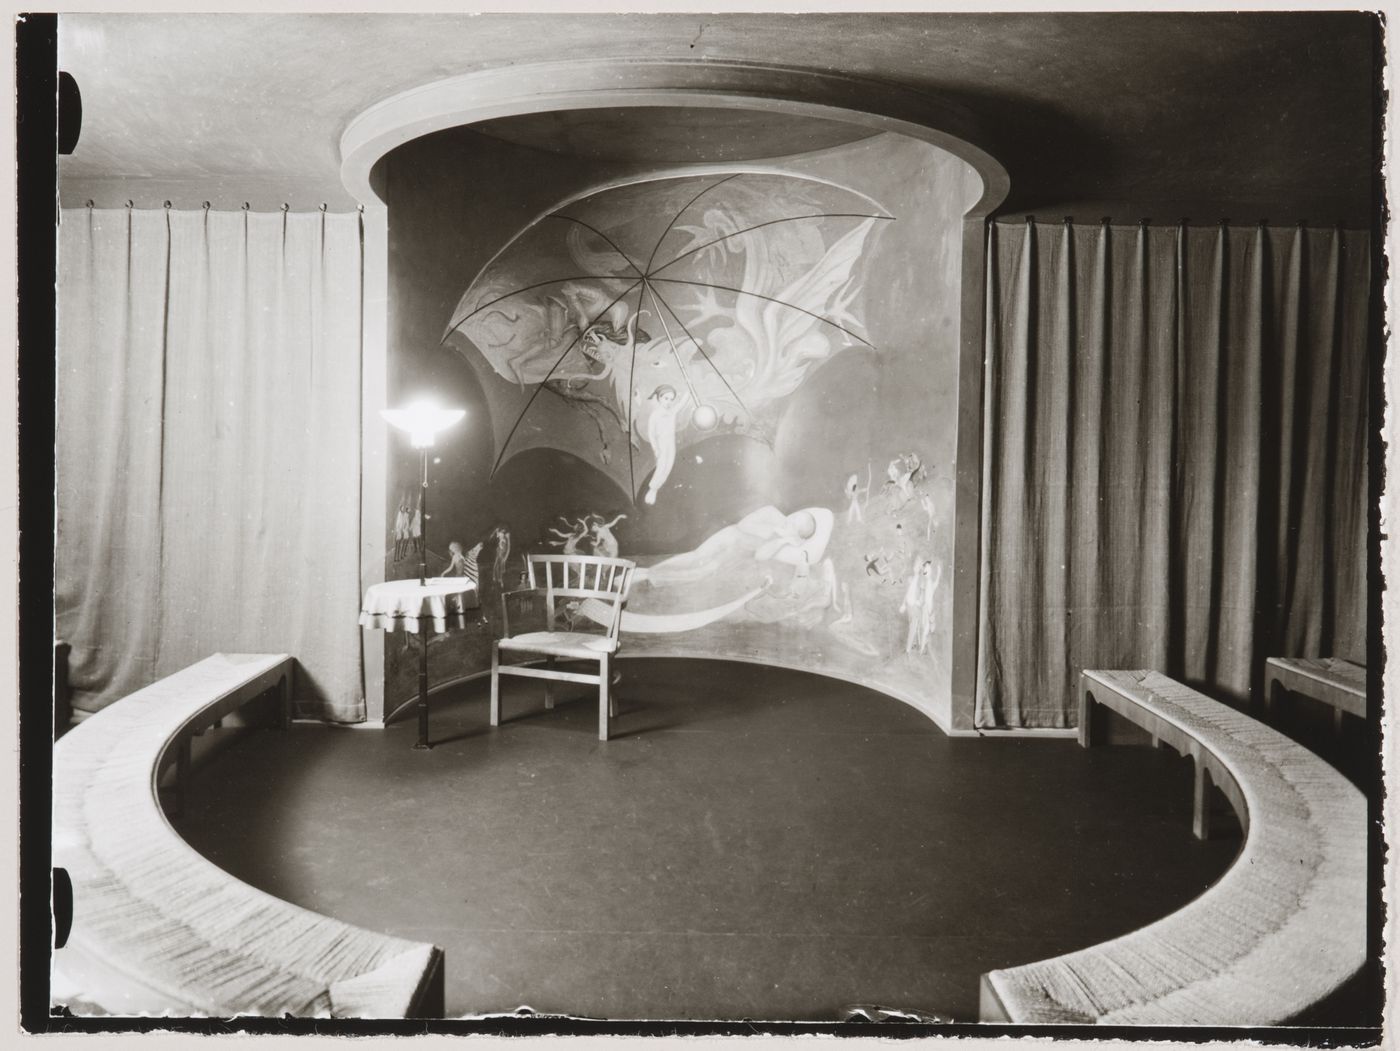 Interior view of the children's storytelling room of Stockholm Public Library showing benches and the fresco designed by Nils Dardel, 51-55 Odengatan, Stockholm